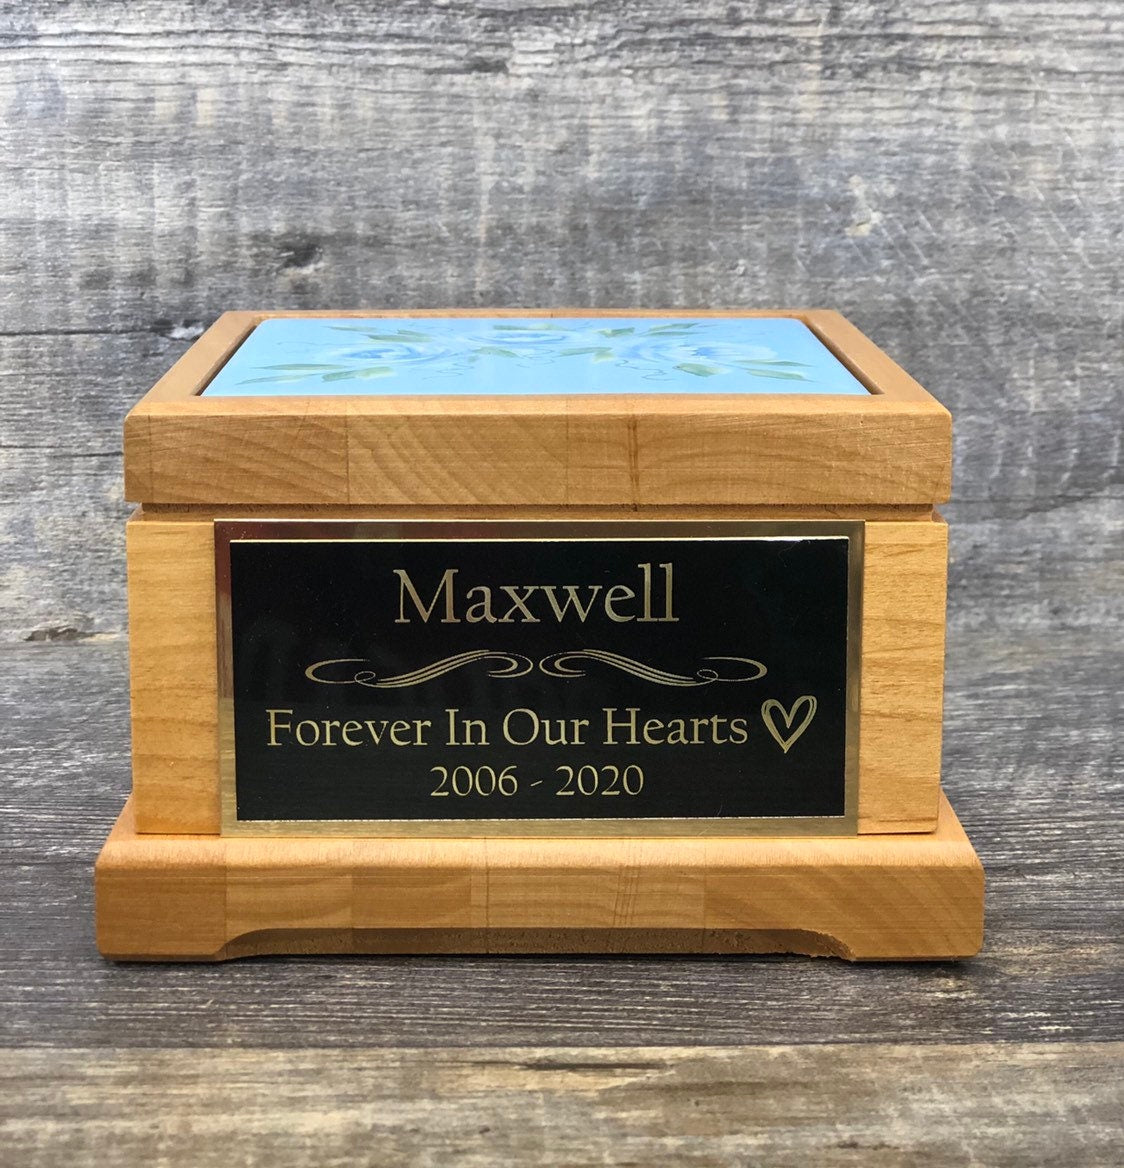 Dog Urn Small Pet Urn Pet Memorial Keepsake Box Cremation Urn Hand Painted Roses Tile & Tag Red Alder Small Dog / Animal Cat Urn Up To 25lbs